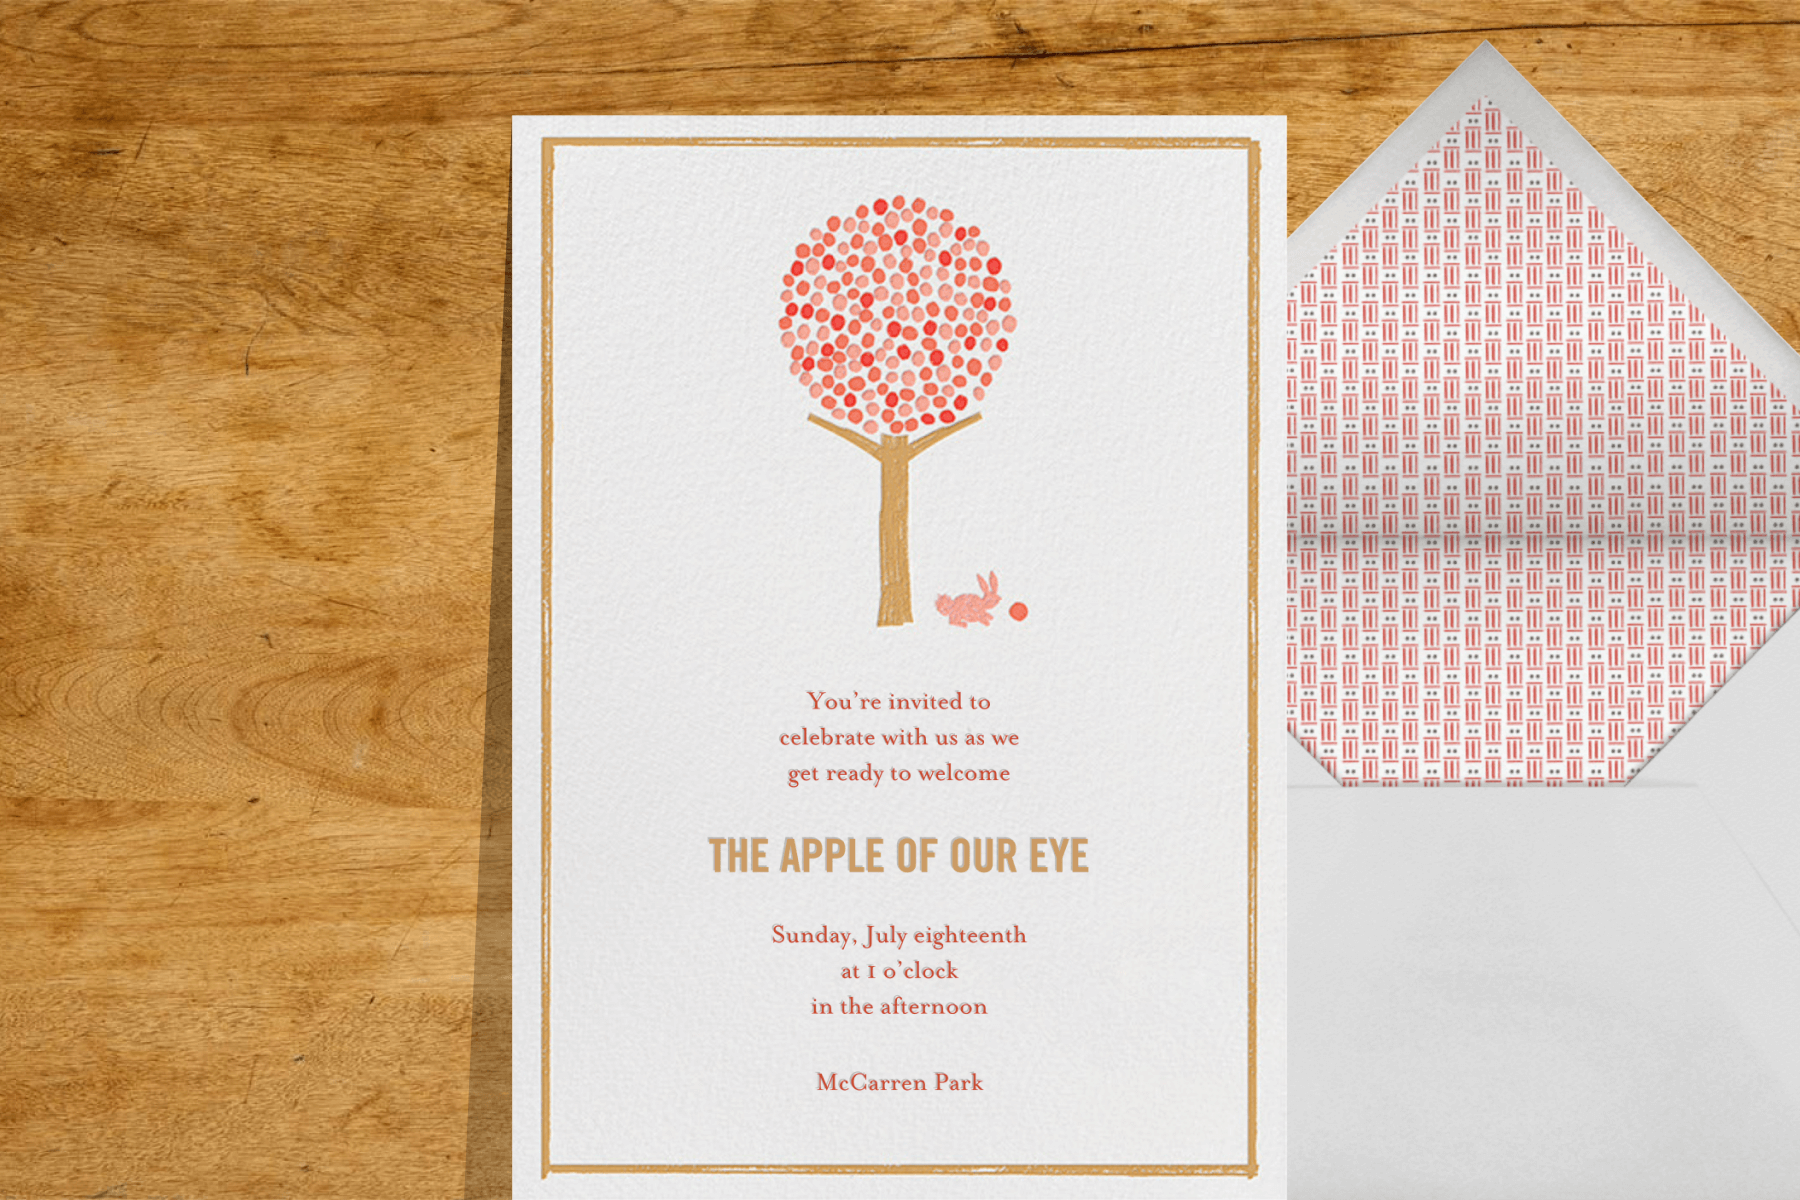 A baby shower invitation featuring an apple tree and a bunny eating an apple.